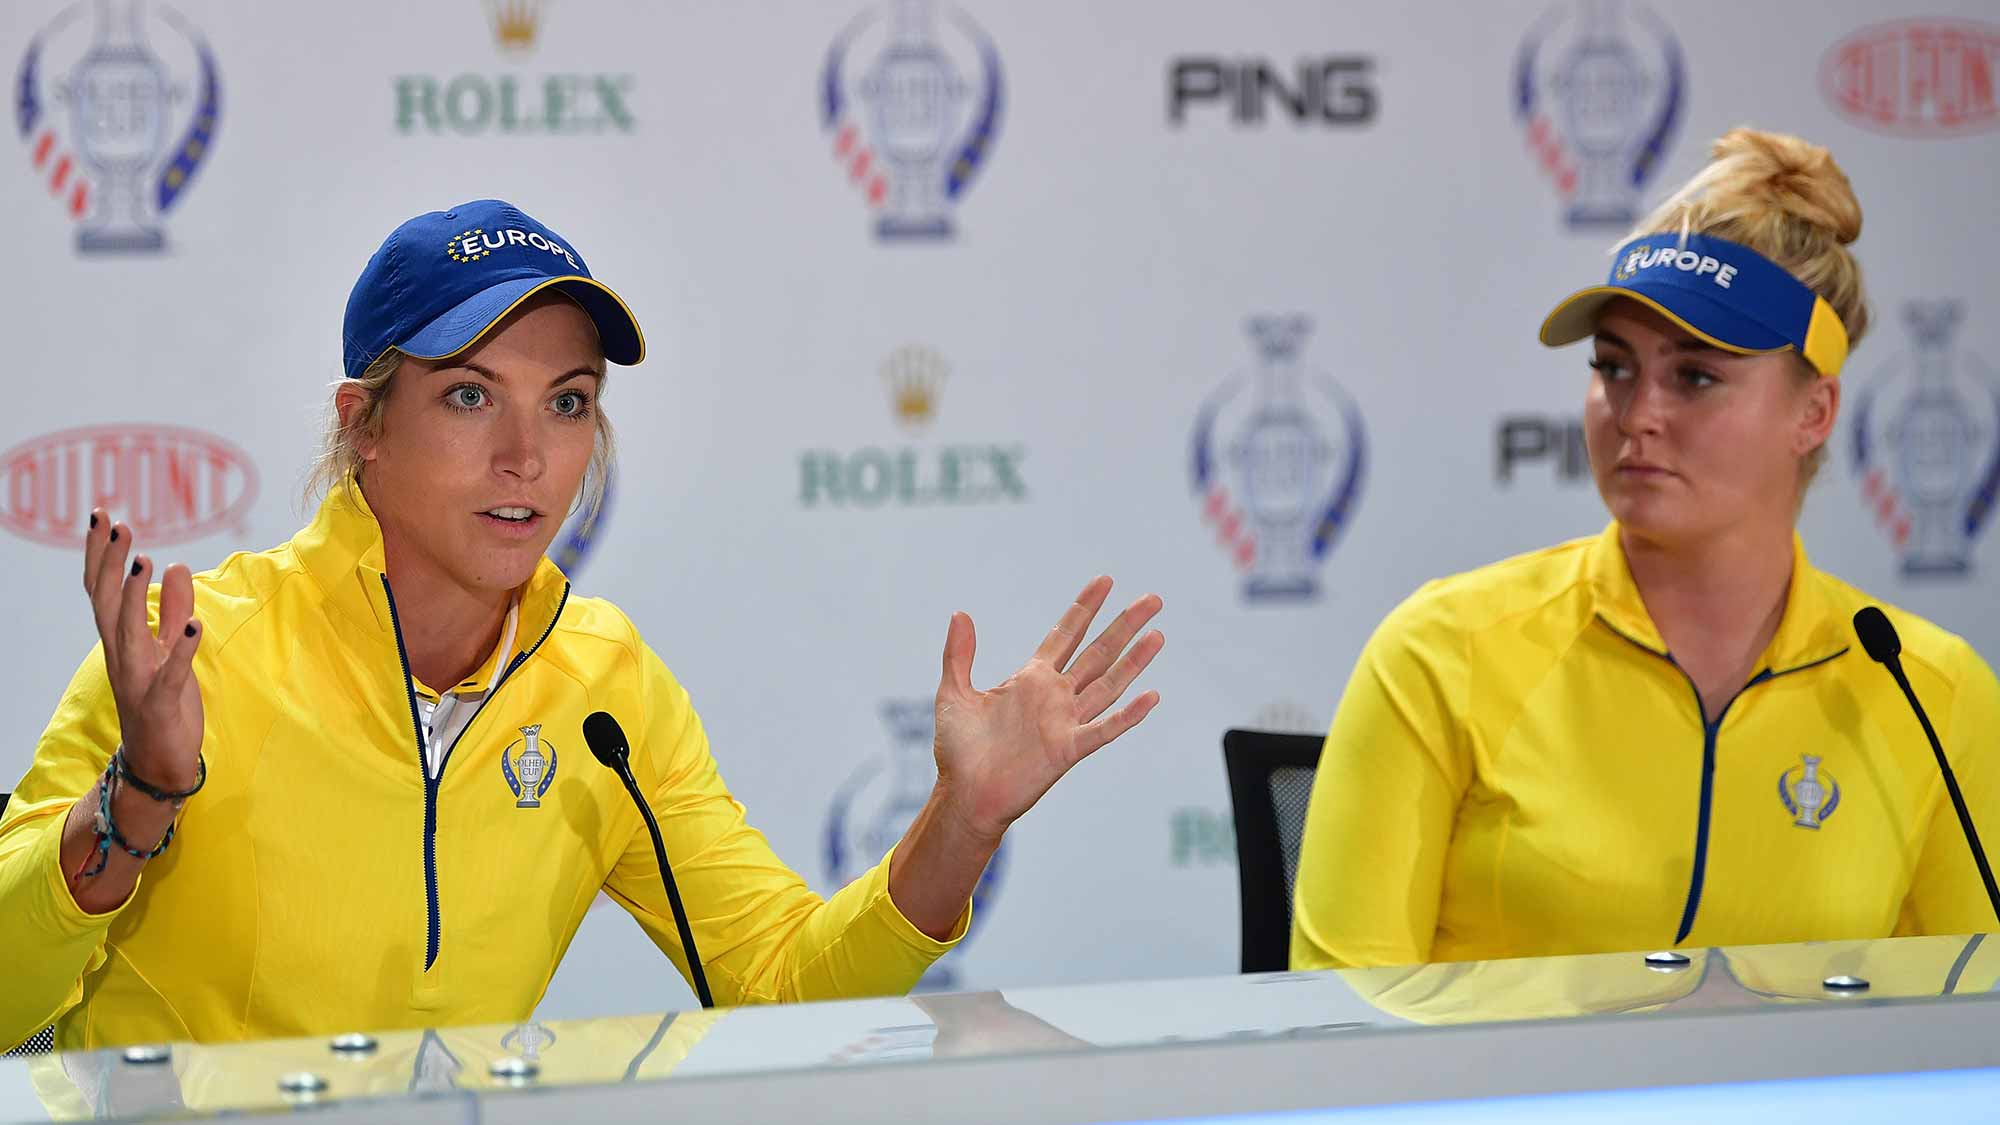  Mel Reid and Charley Hull of Team Europe talk to the media during a press conference for The Solheim Cup at the Des Moines Country Club 